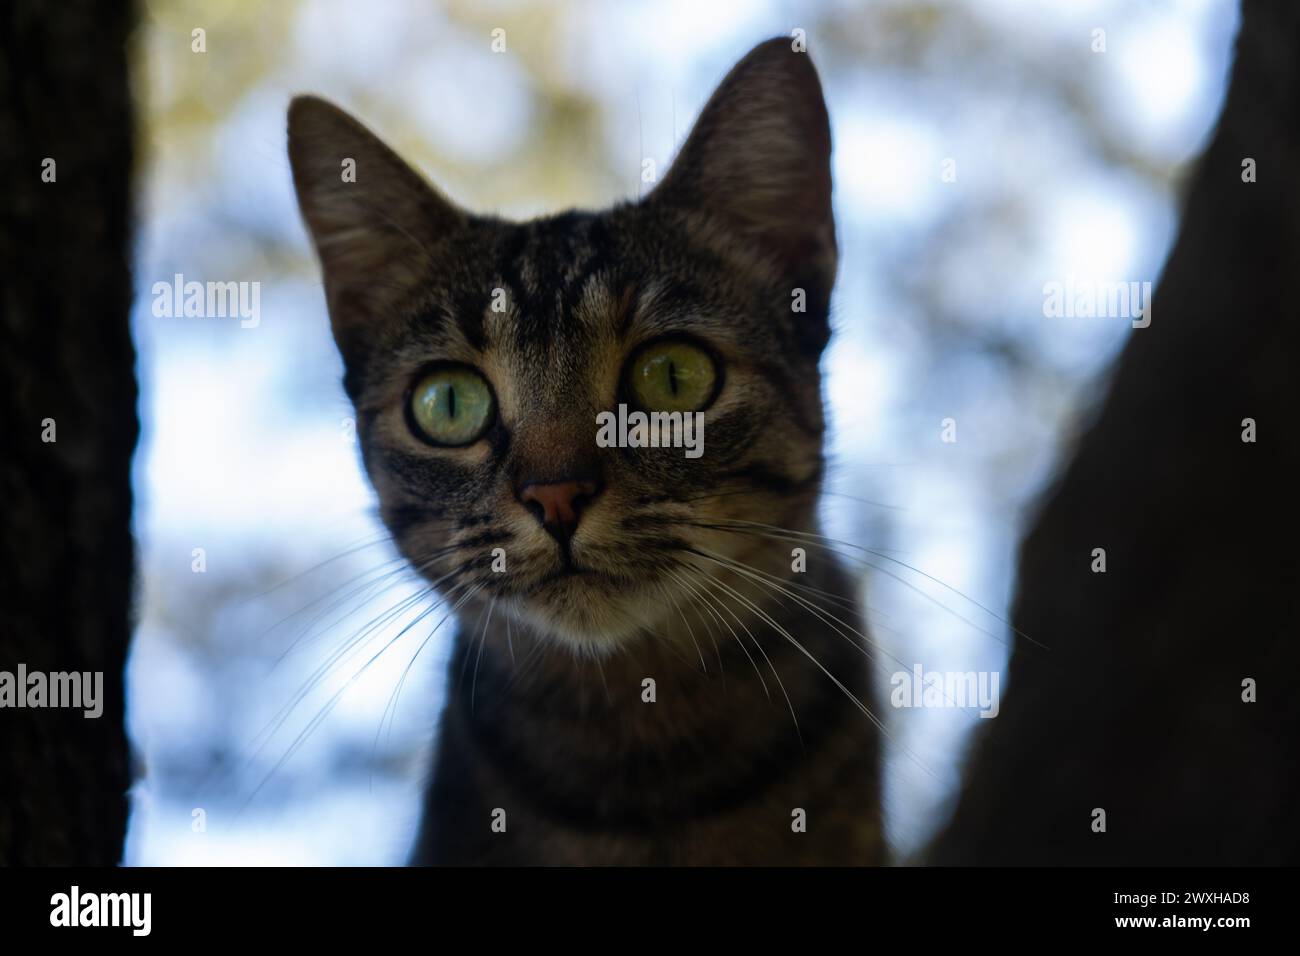 Cat looking intently with big eyes Stock Photo